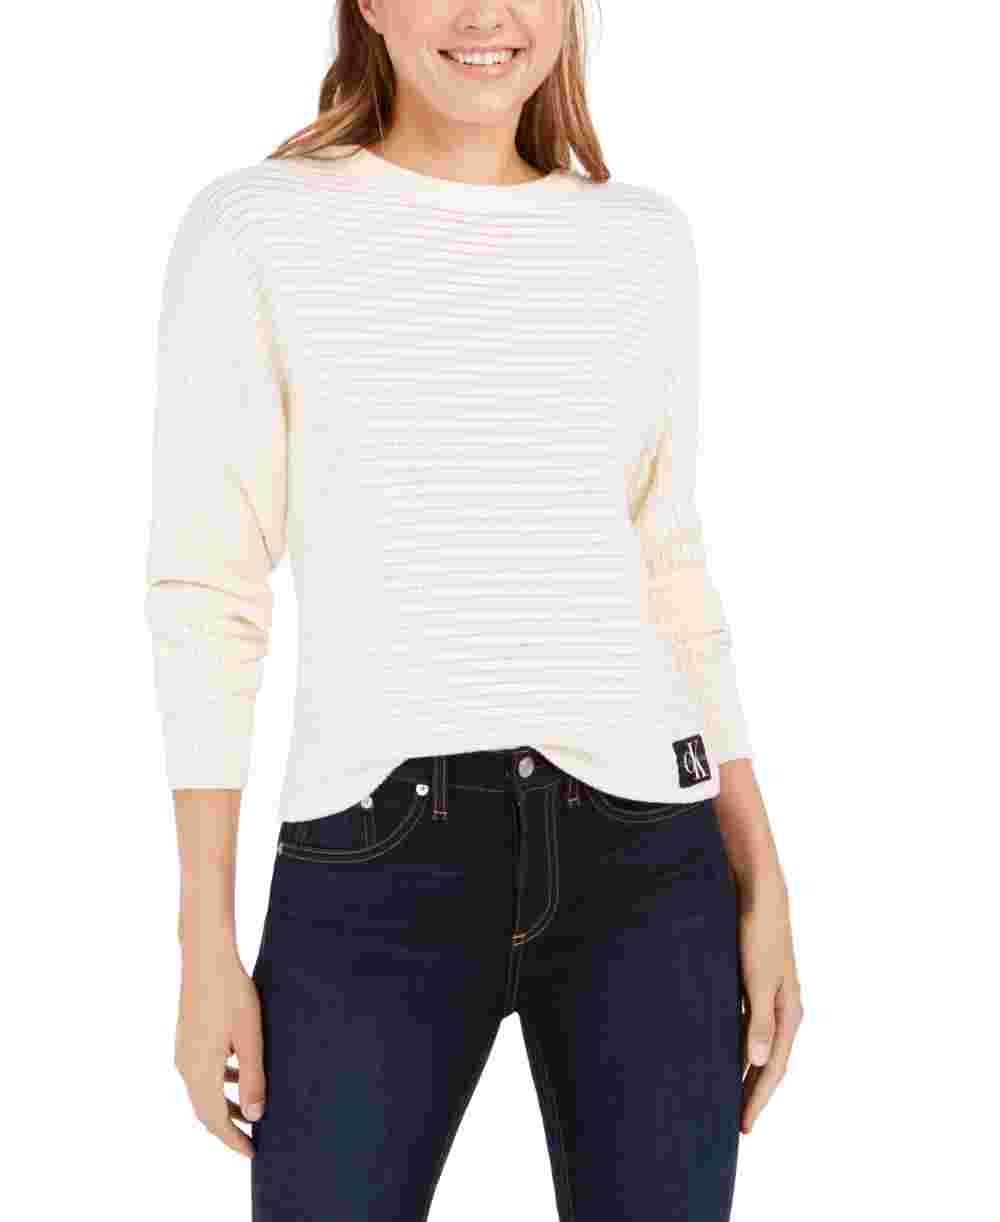 Calvin Klein Jeans Women's Cotton Sweater White Size X-Large - image 1 of 3